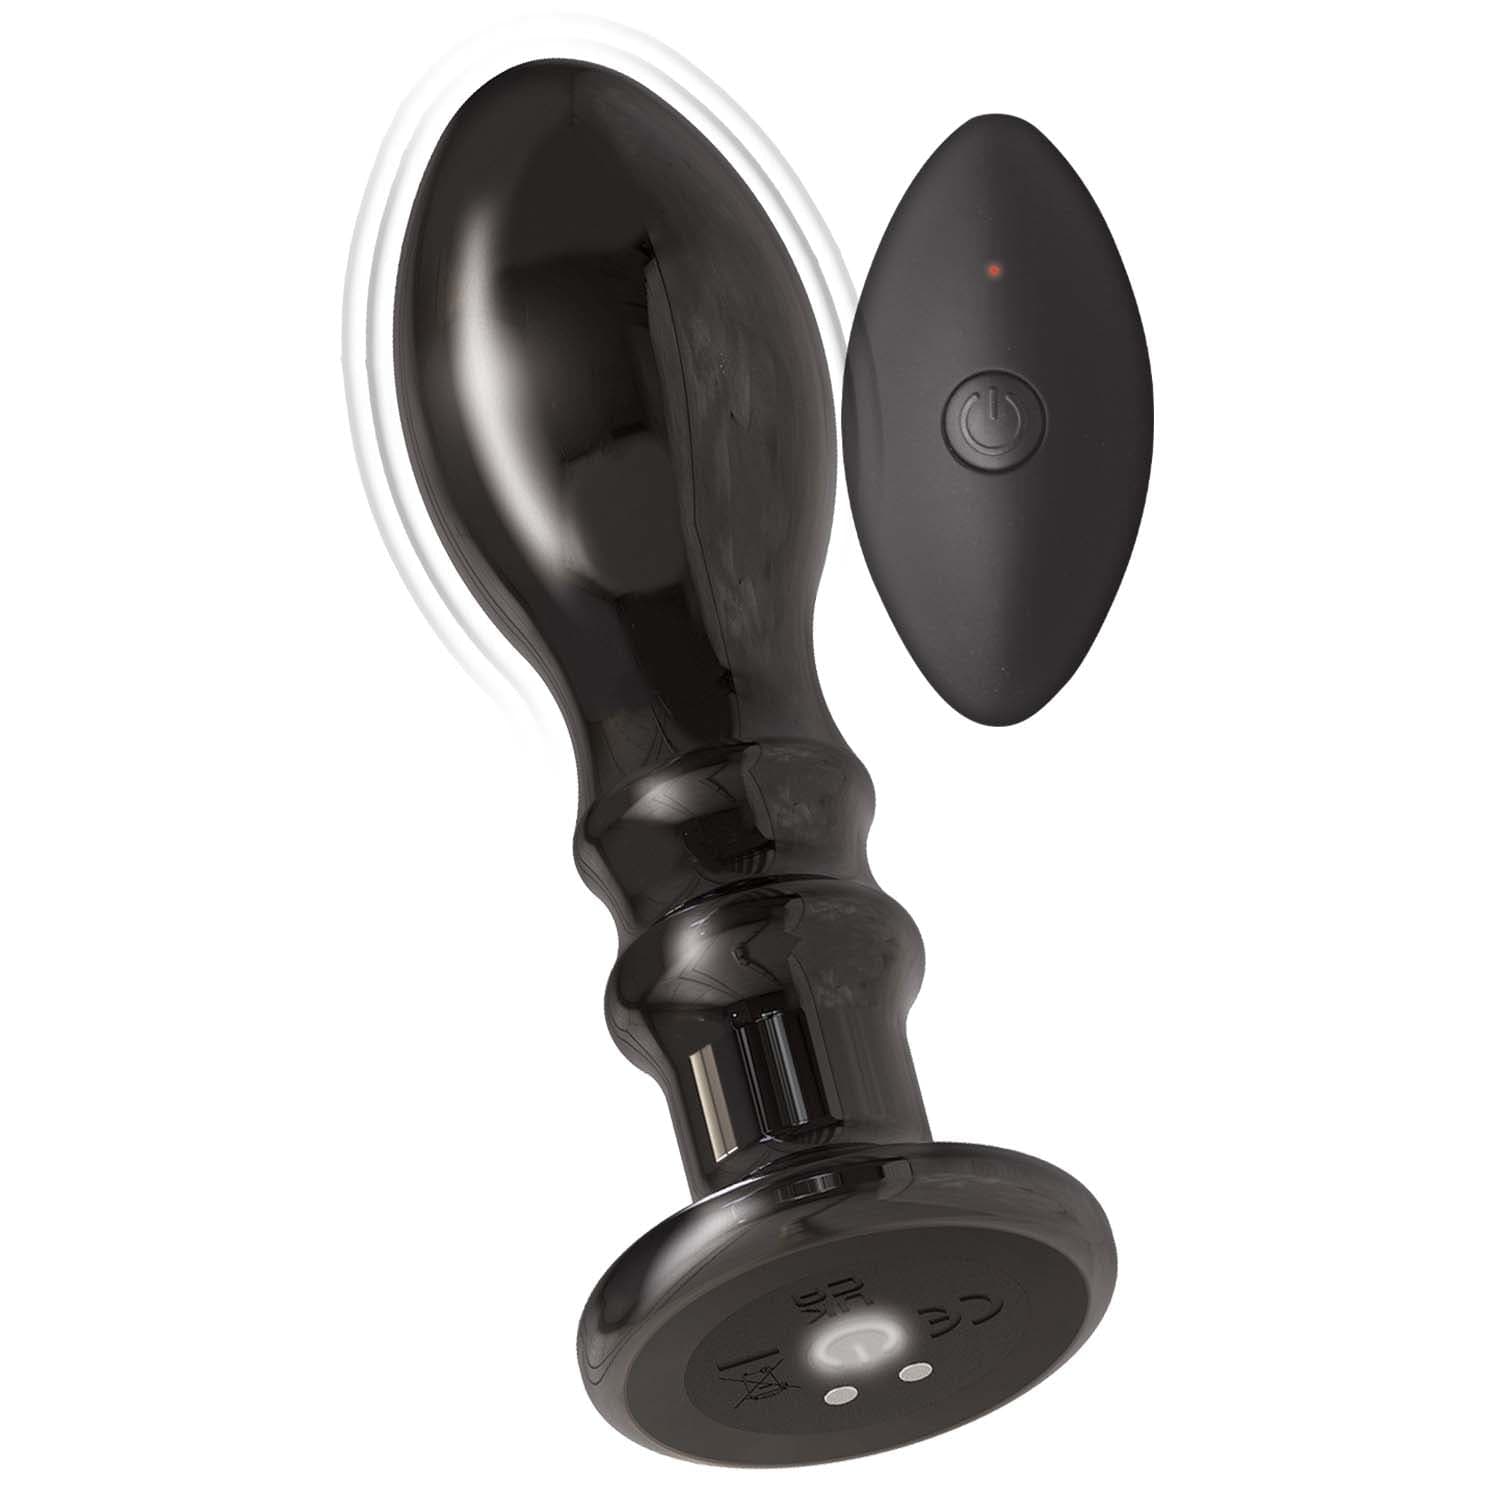 Ass-Sation Remote Vibrating Metal Anal Pleaser